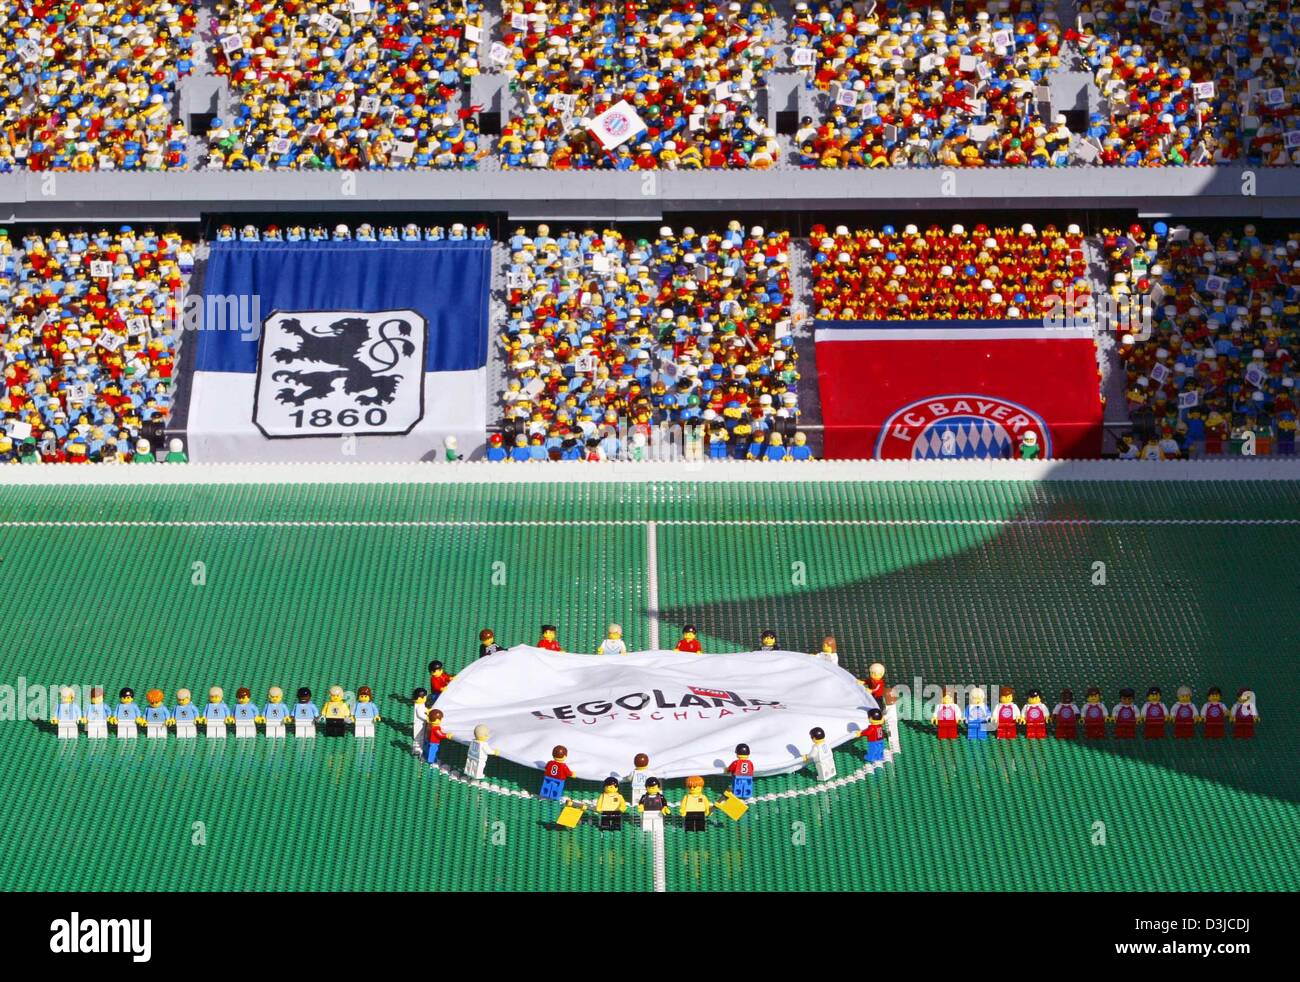 (dpa) - People take a first look at the new design model of Munich's Allianz Arena soccer stadium in Guenzburg, Germany, 12 May 2005. The model is made of one million lego pieces and was introduced to the public 18 days prior to the grand opening of the original stadium in Munich. Stock Photo